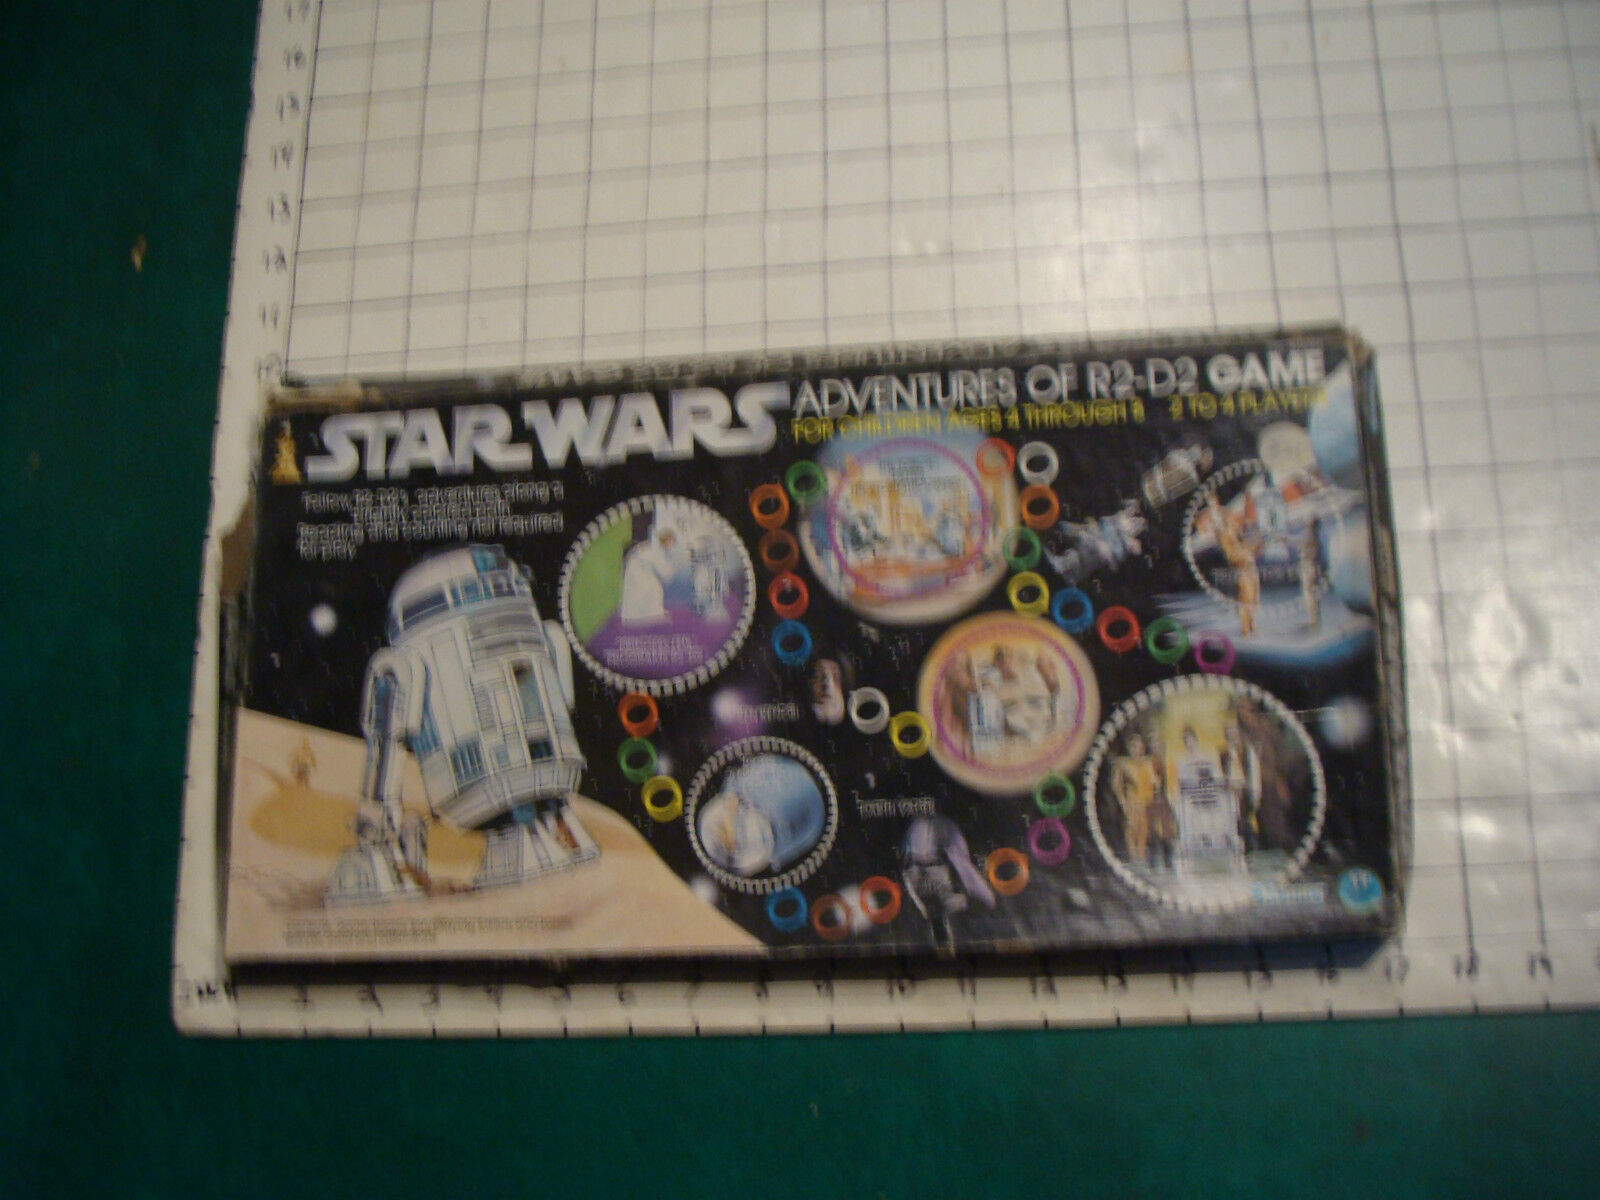 vintage game:  1977 STAR WARS adventures of R2-D2 game, FOR PARTS not complete